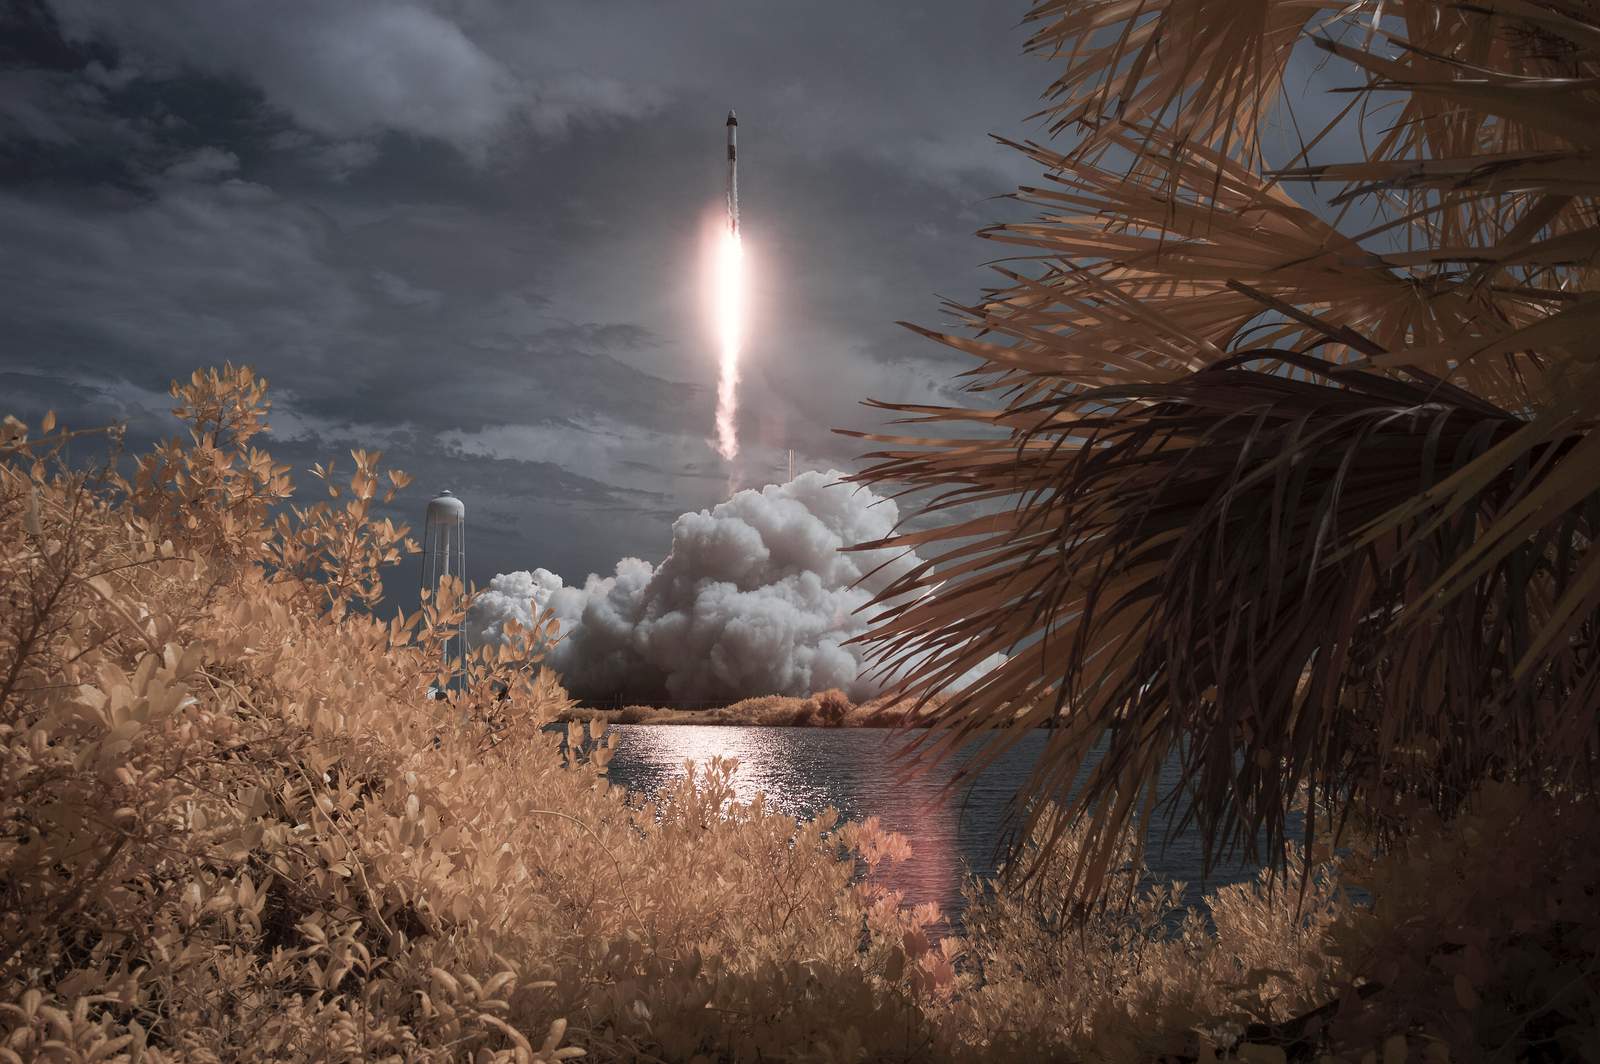 Space roundup: List of launches, landings and out-of-this world announcements